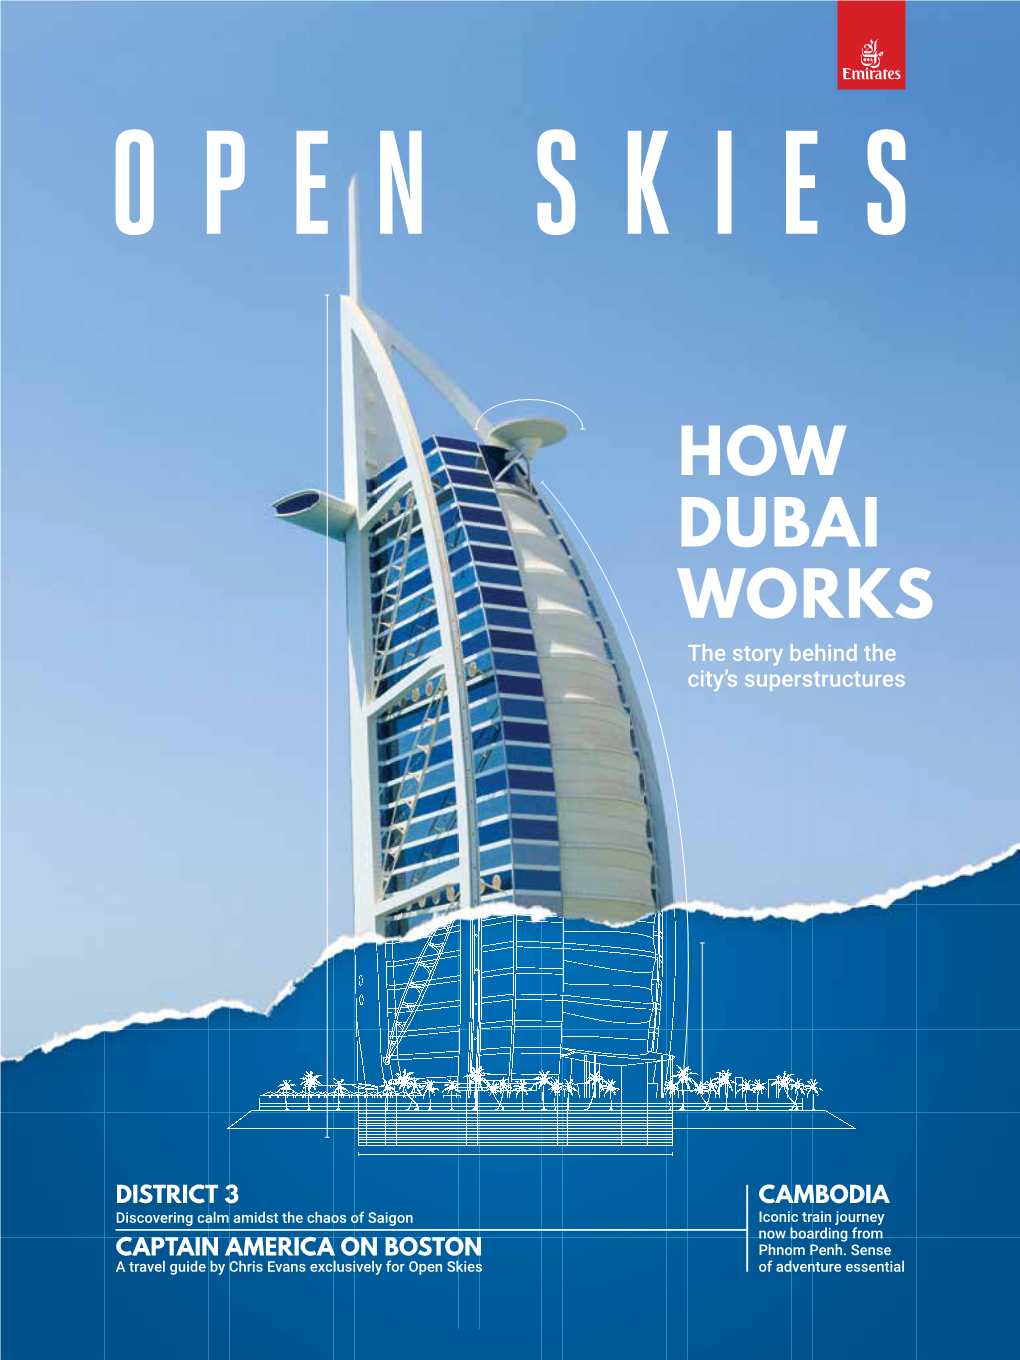 HOW DUBAI WORKS the Story Behind the City’S Superstructures